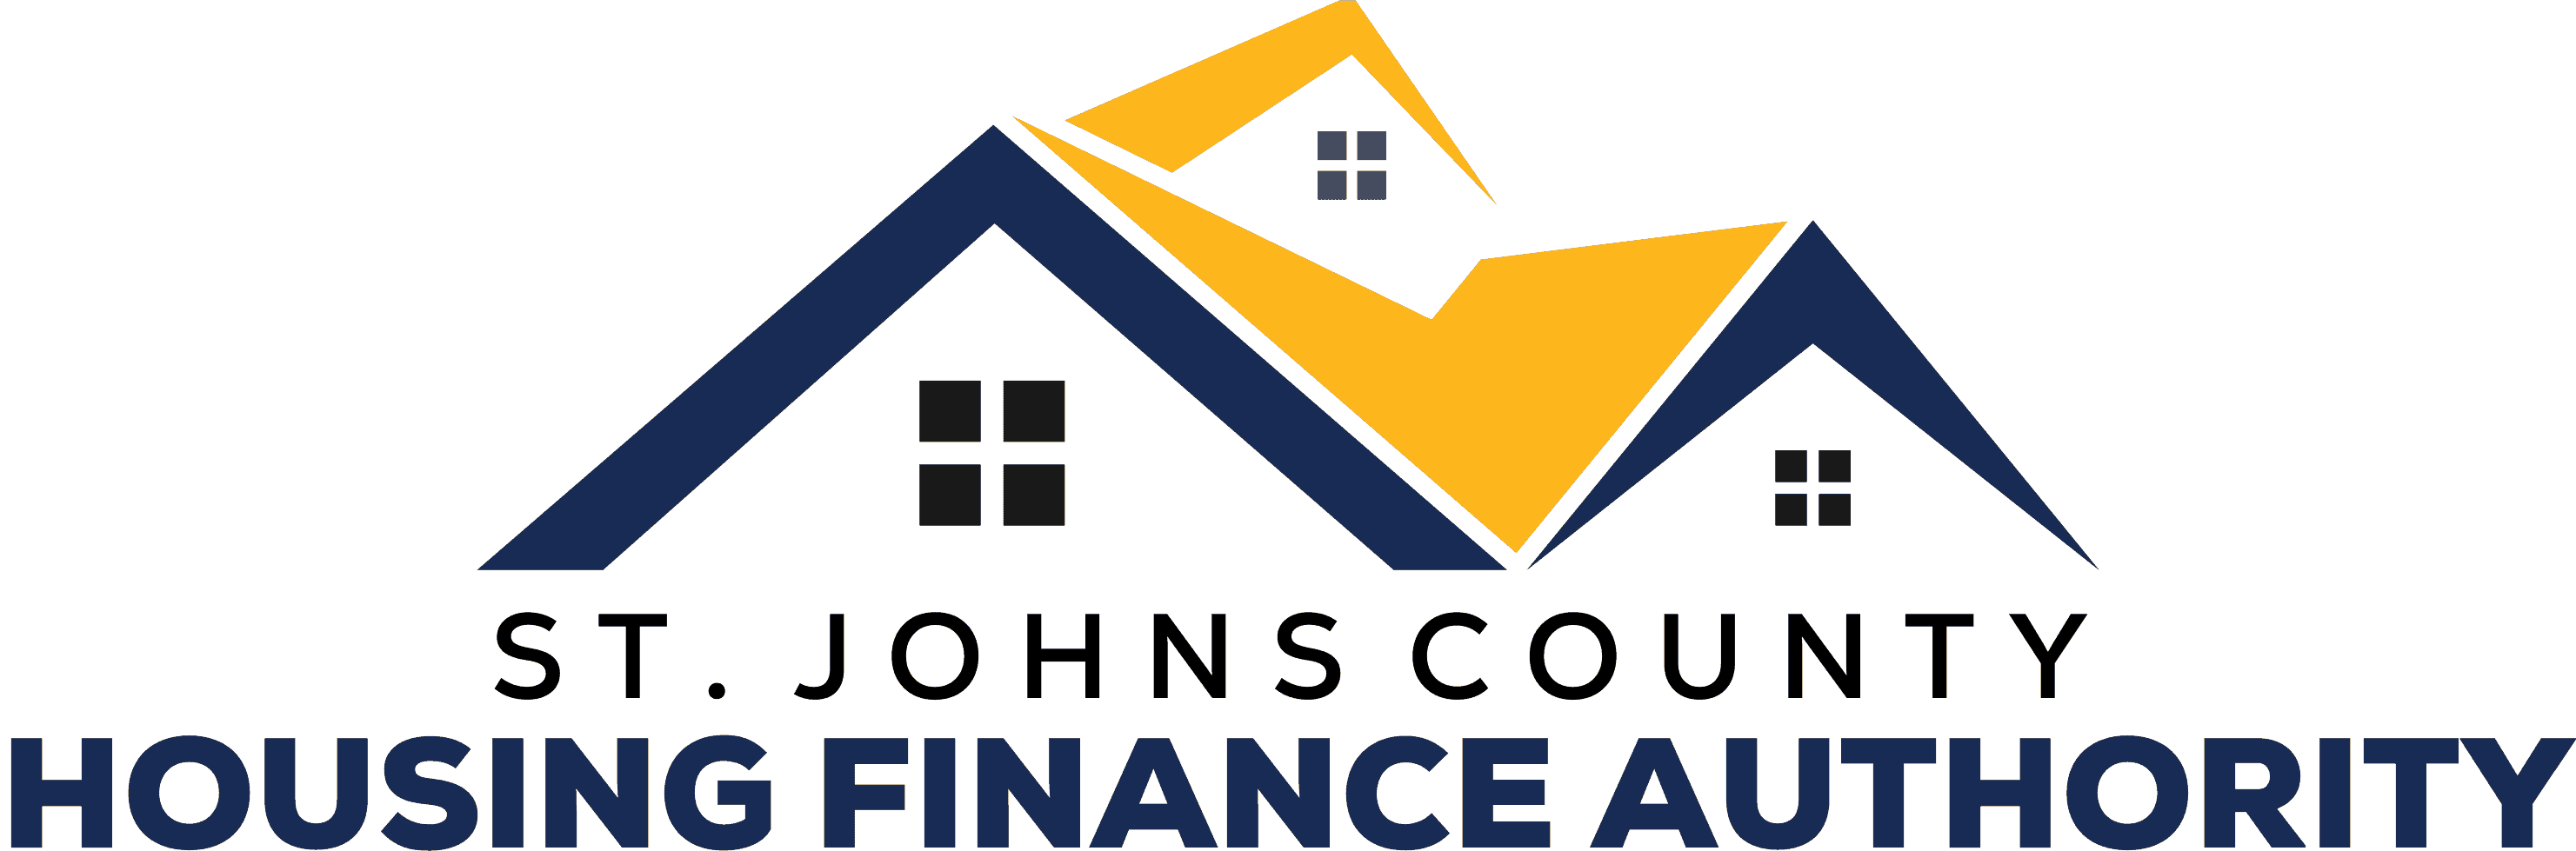 St Johns County Housing Finance Authority